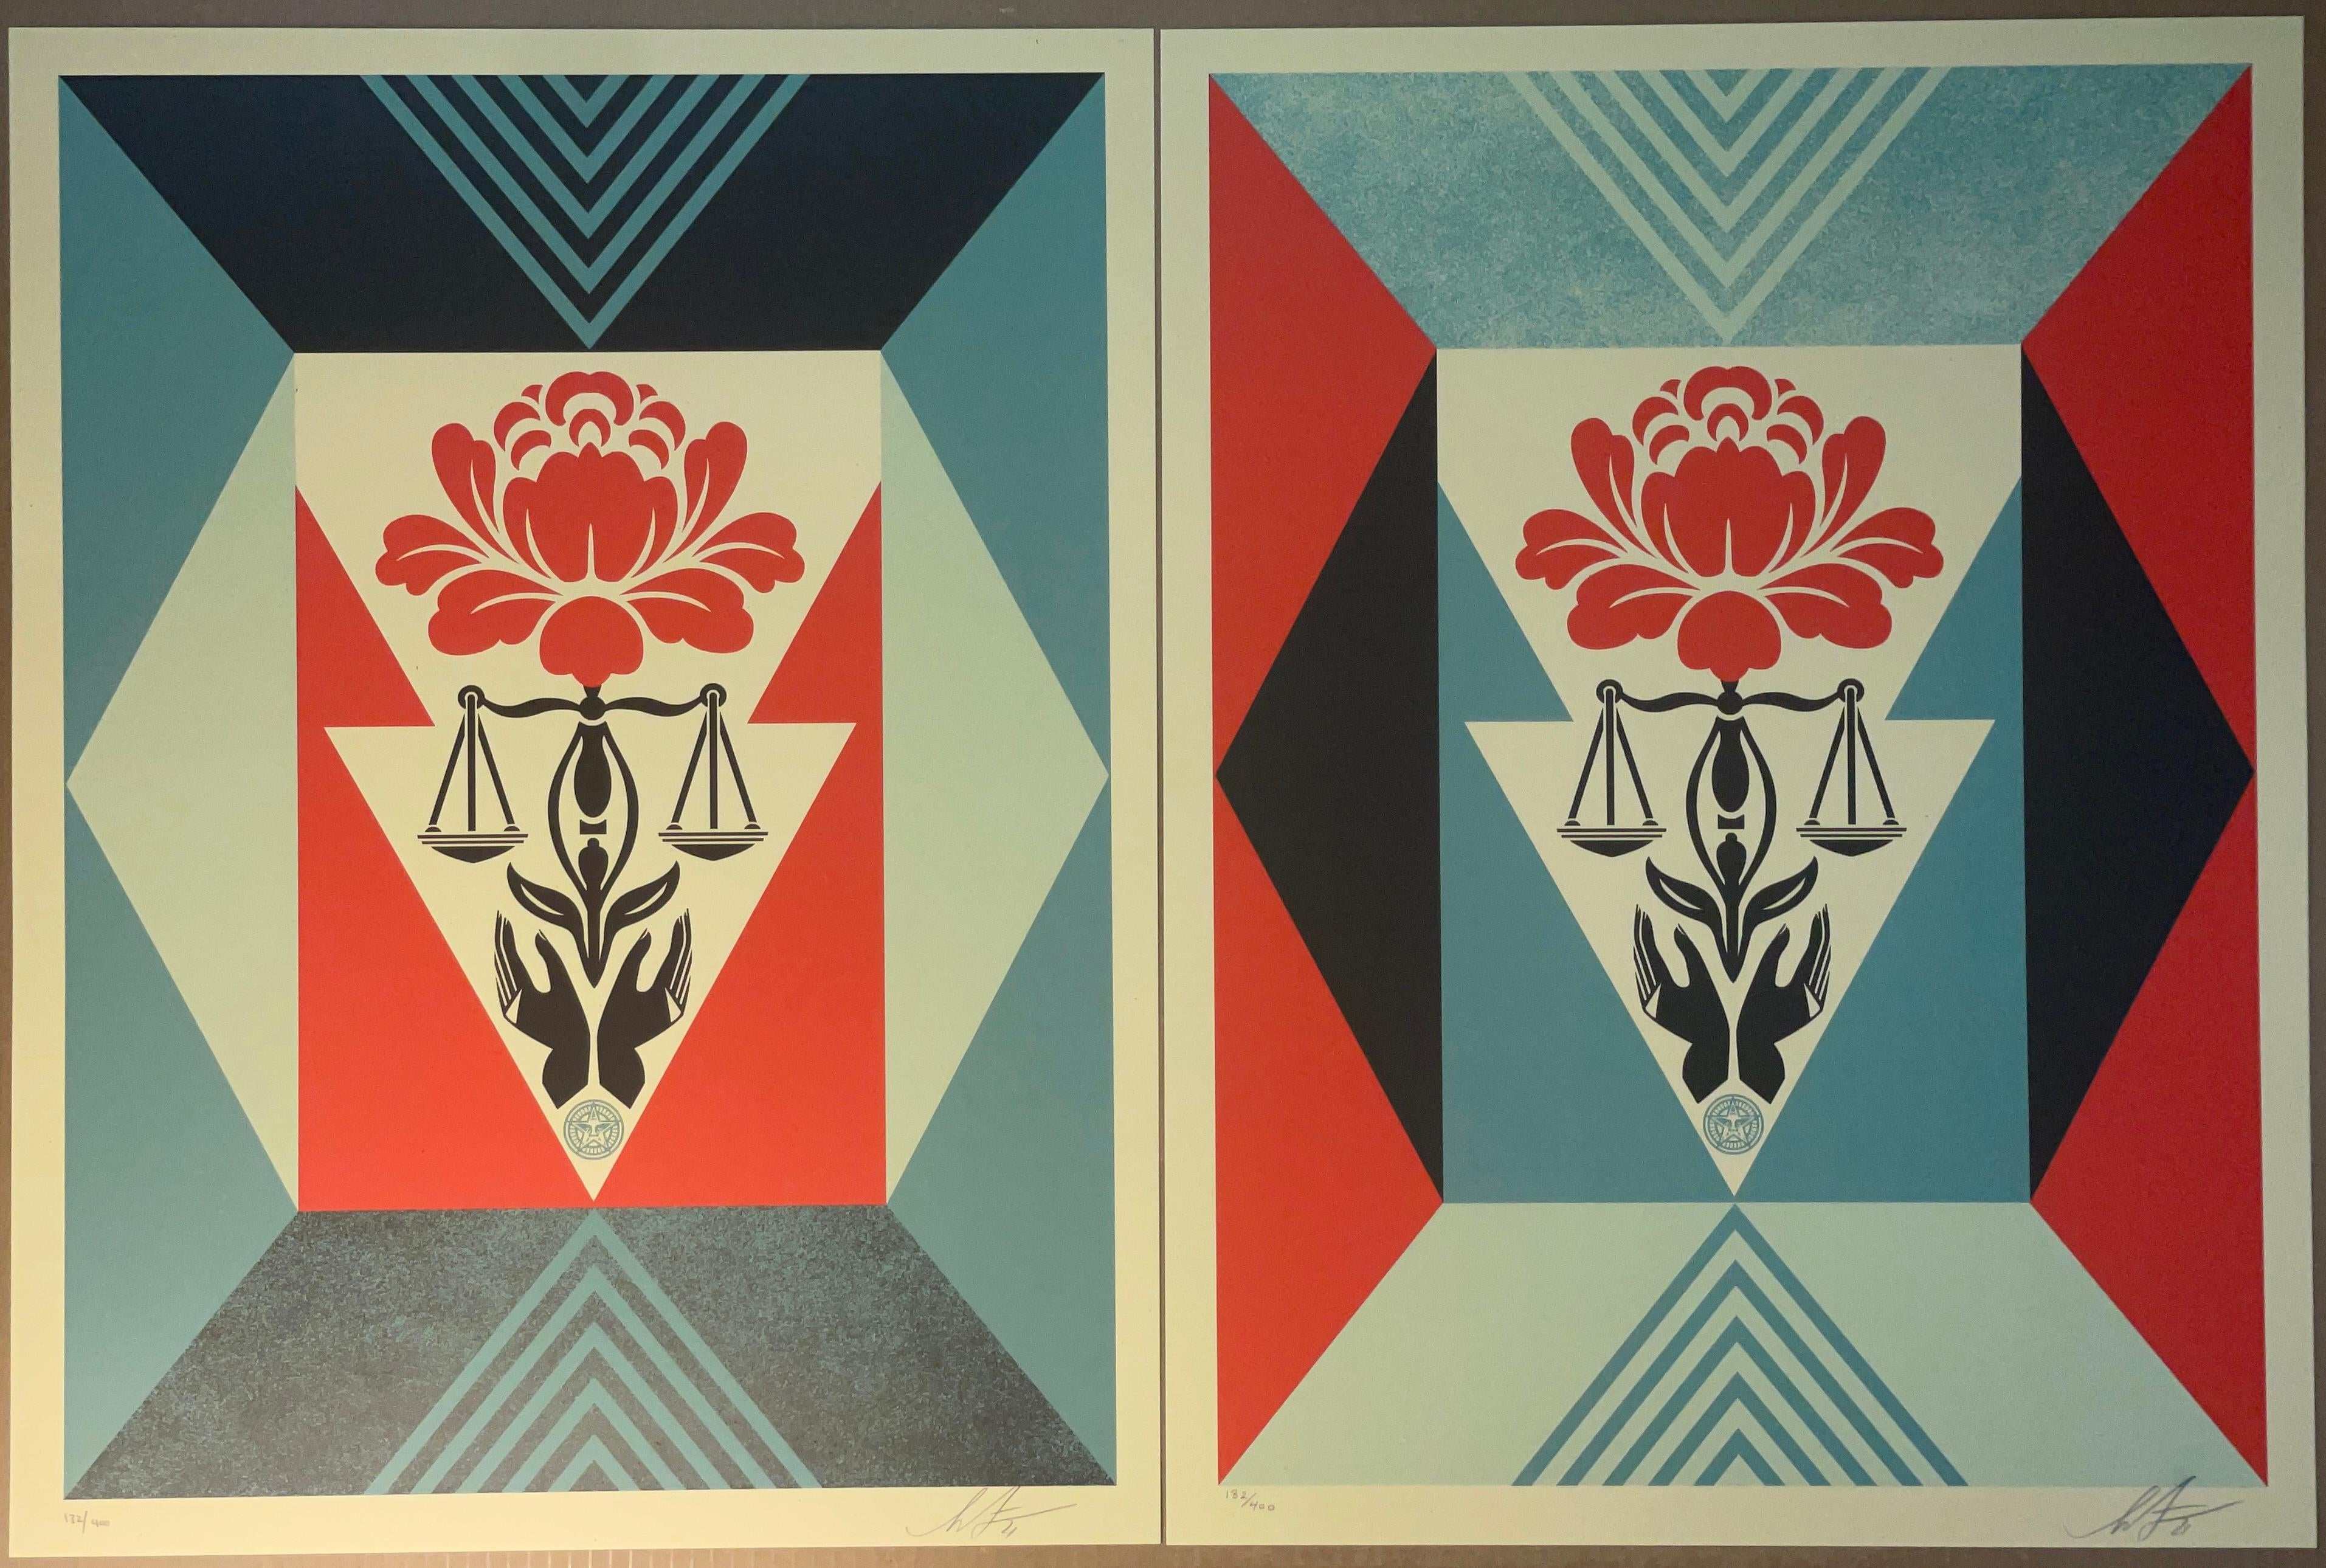 Shepard Fairey "Cultivate Justice" Blue & Red Diptych Matching Numbered Set 